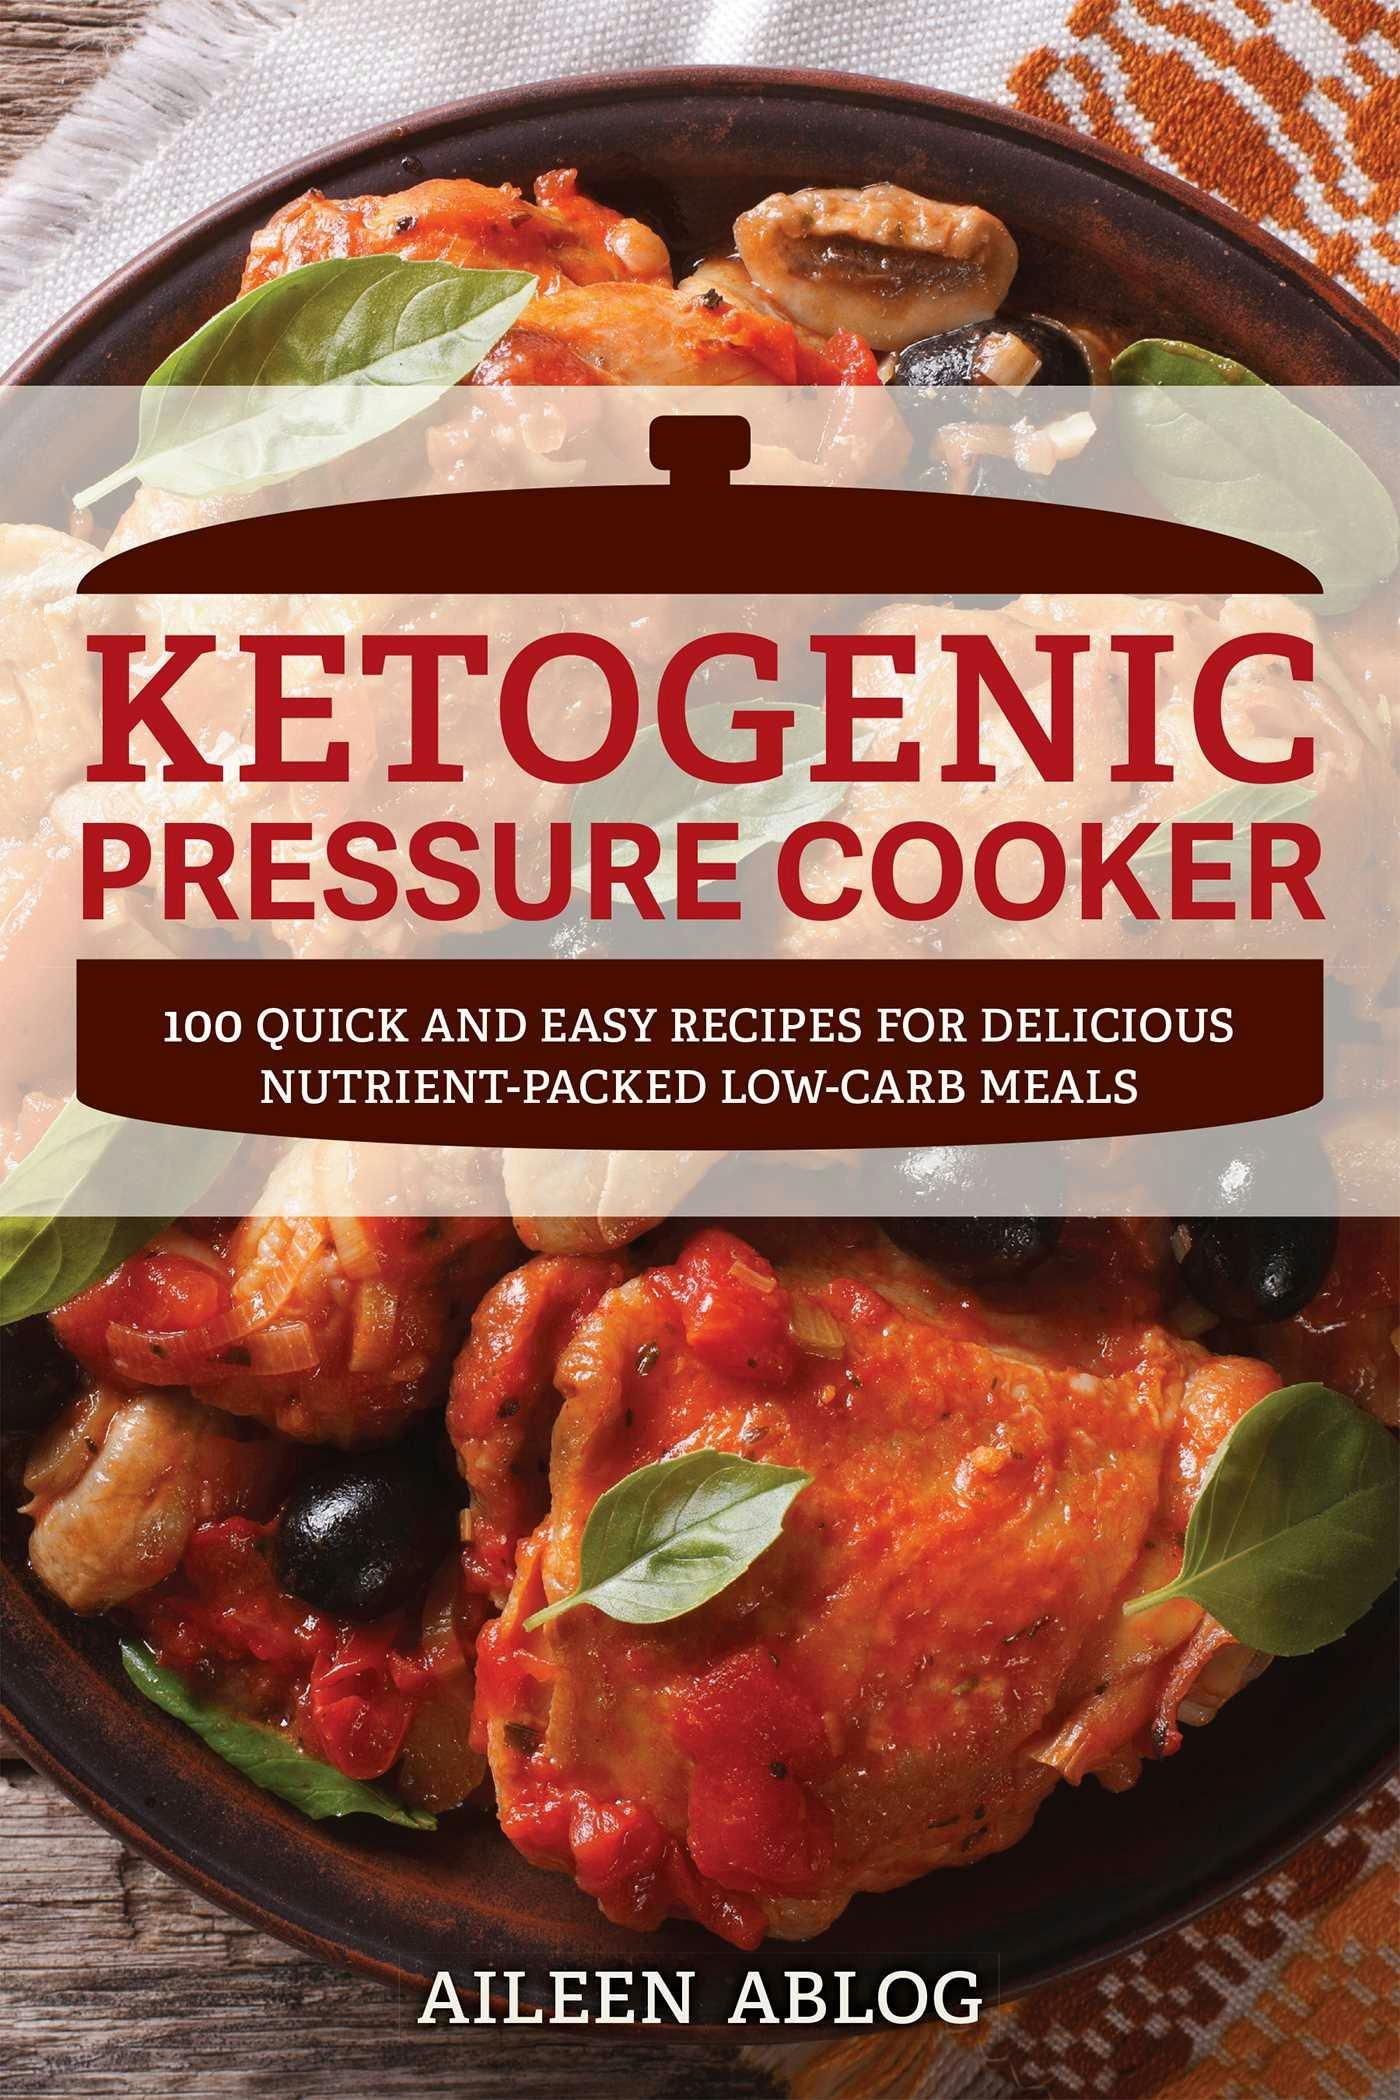 Ketogenic Pressure Cooker: 100 Quick and Easy Recipes for Delicious Nutrient-Packed Low-Carb Meals - Aileen Ablog